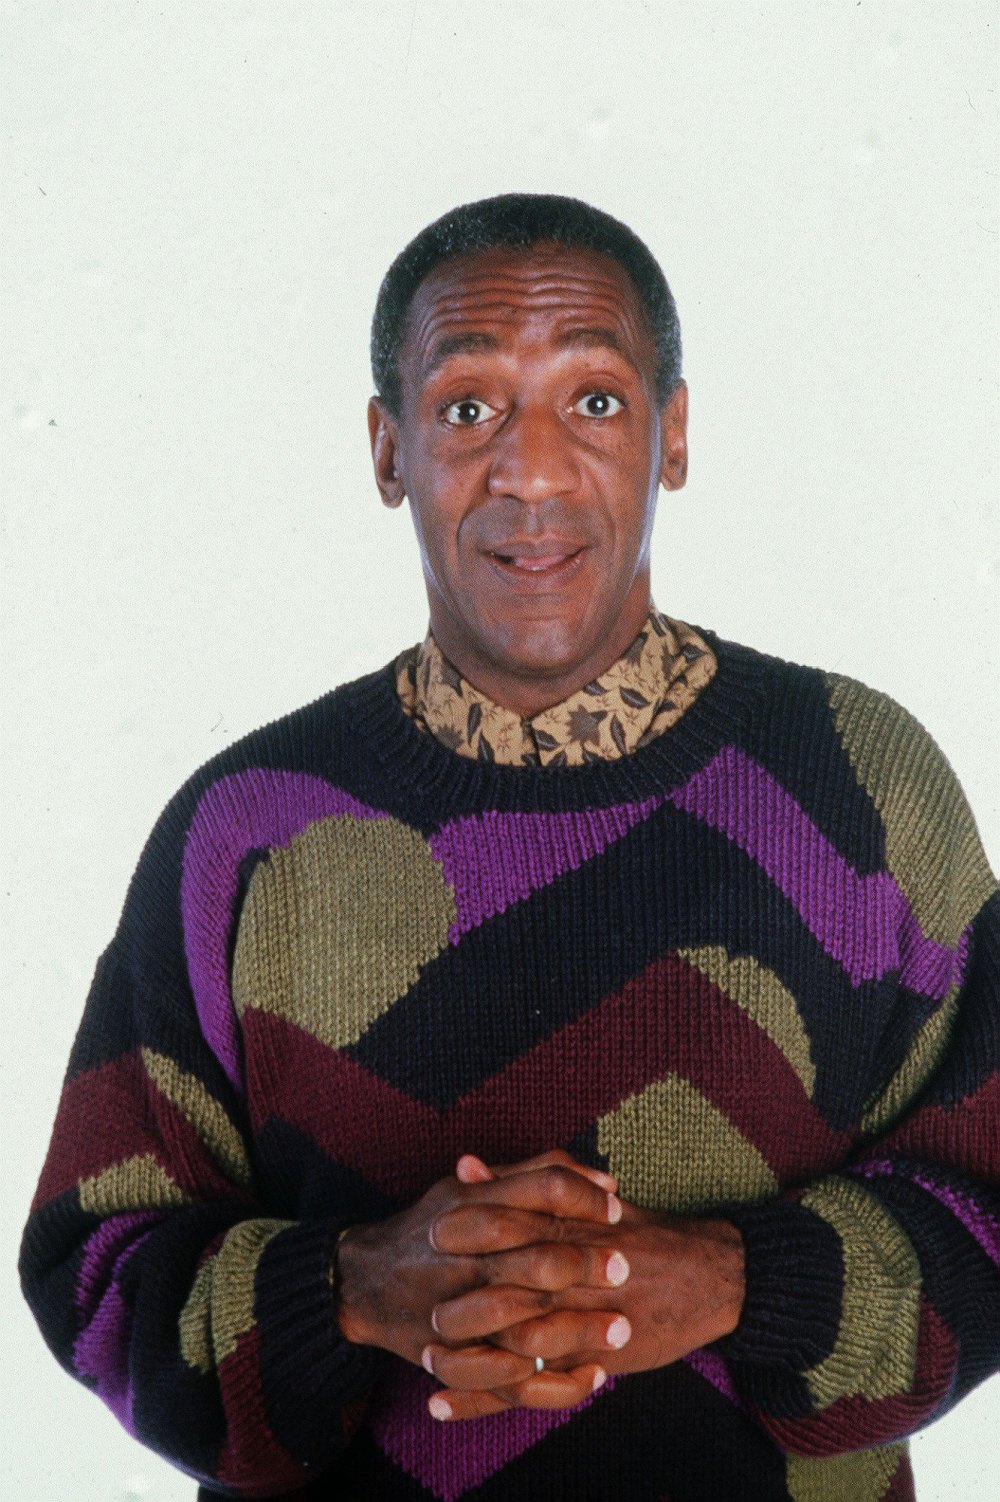 Bill Cosby’s Meme Request Backfires As Internet Focuses on Rape, Sexual Misconduct Charges